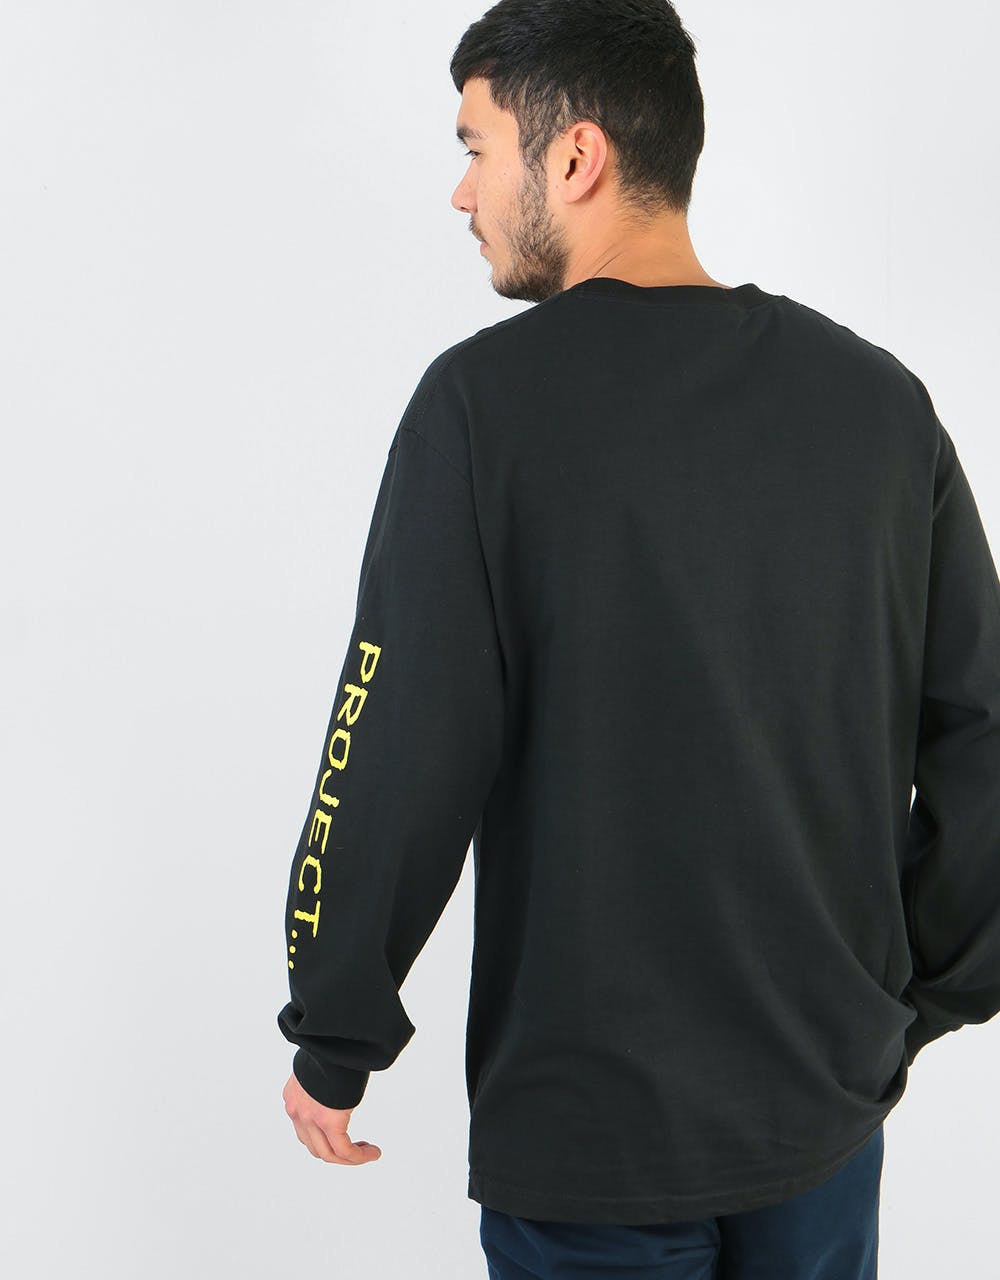 The National Skateboard Co Restore Project L/S T-Shirt - Black